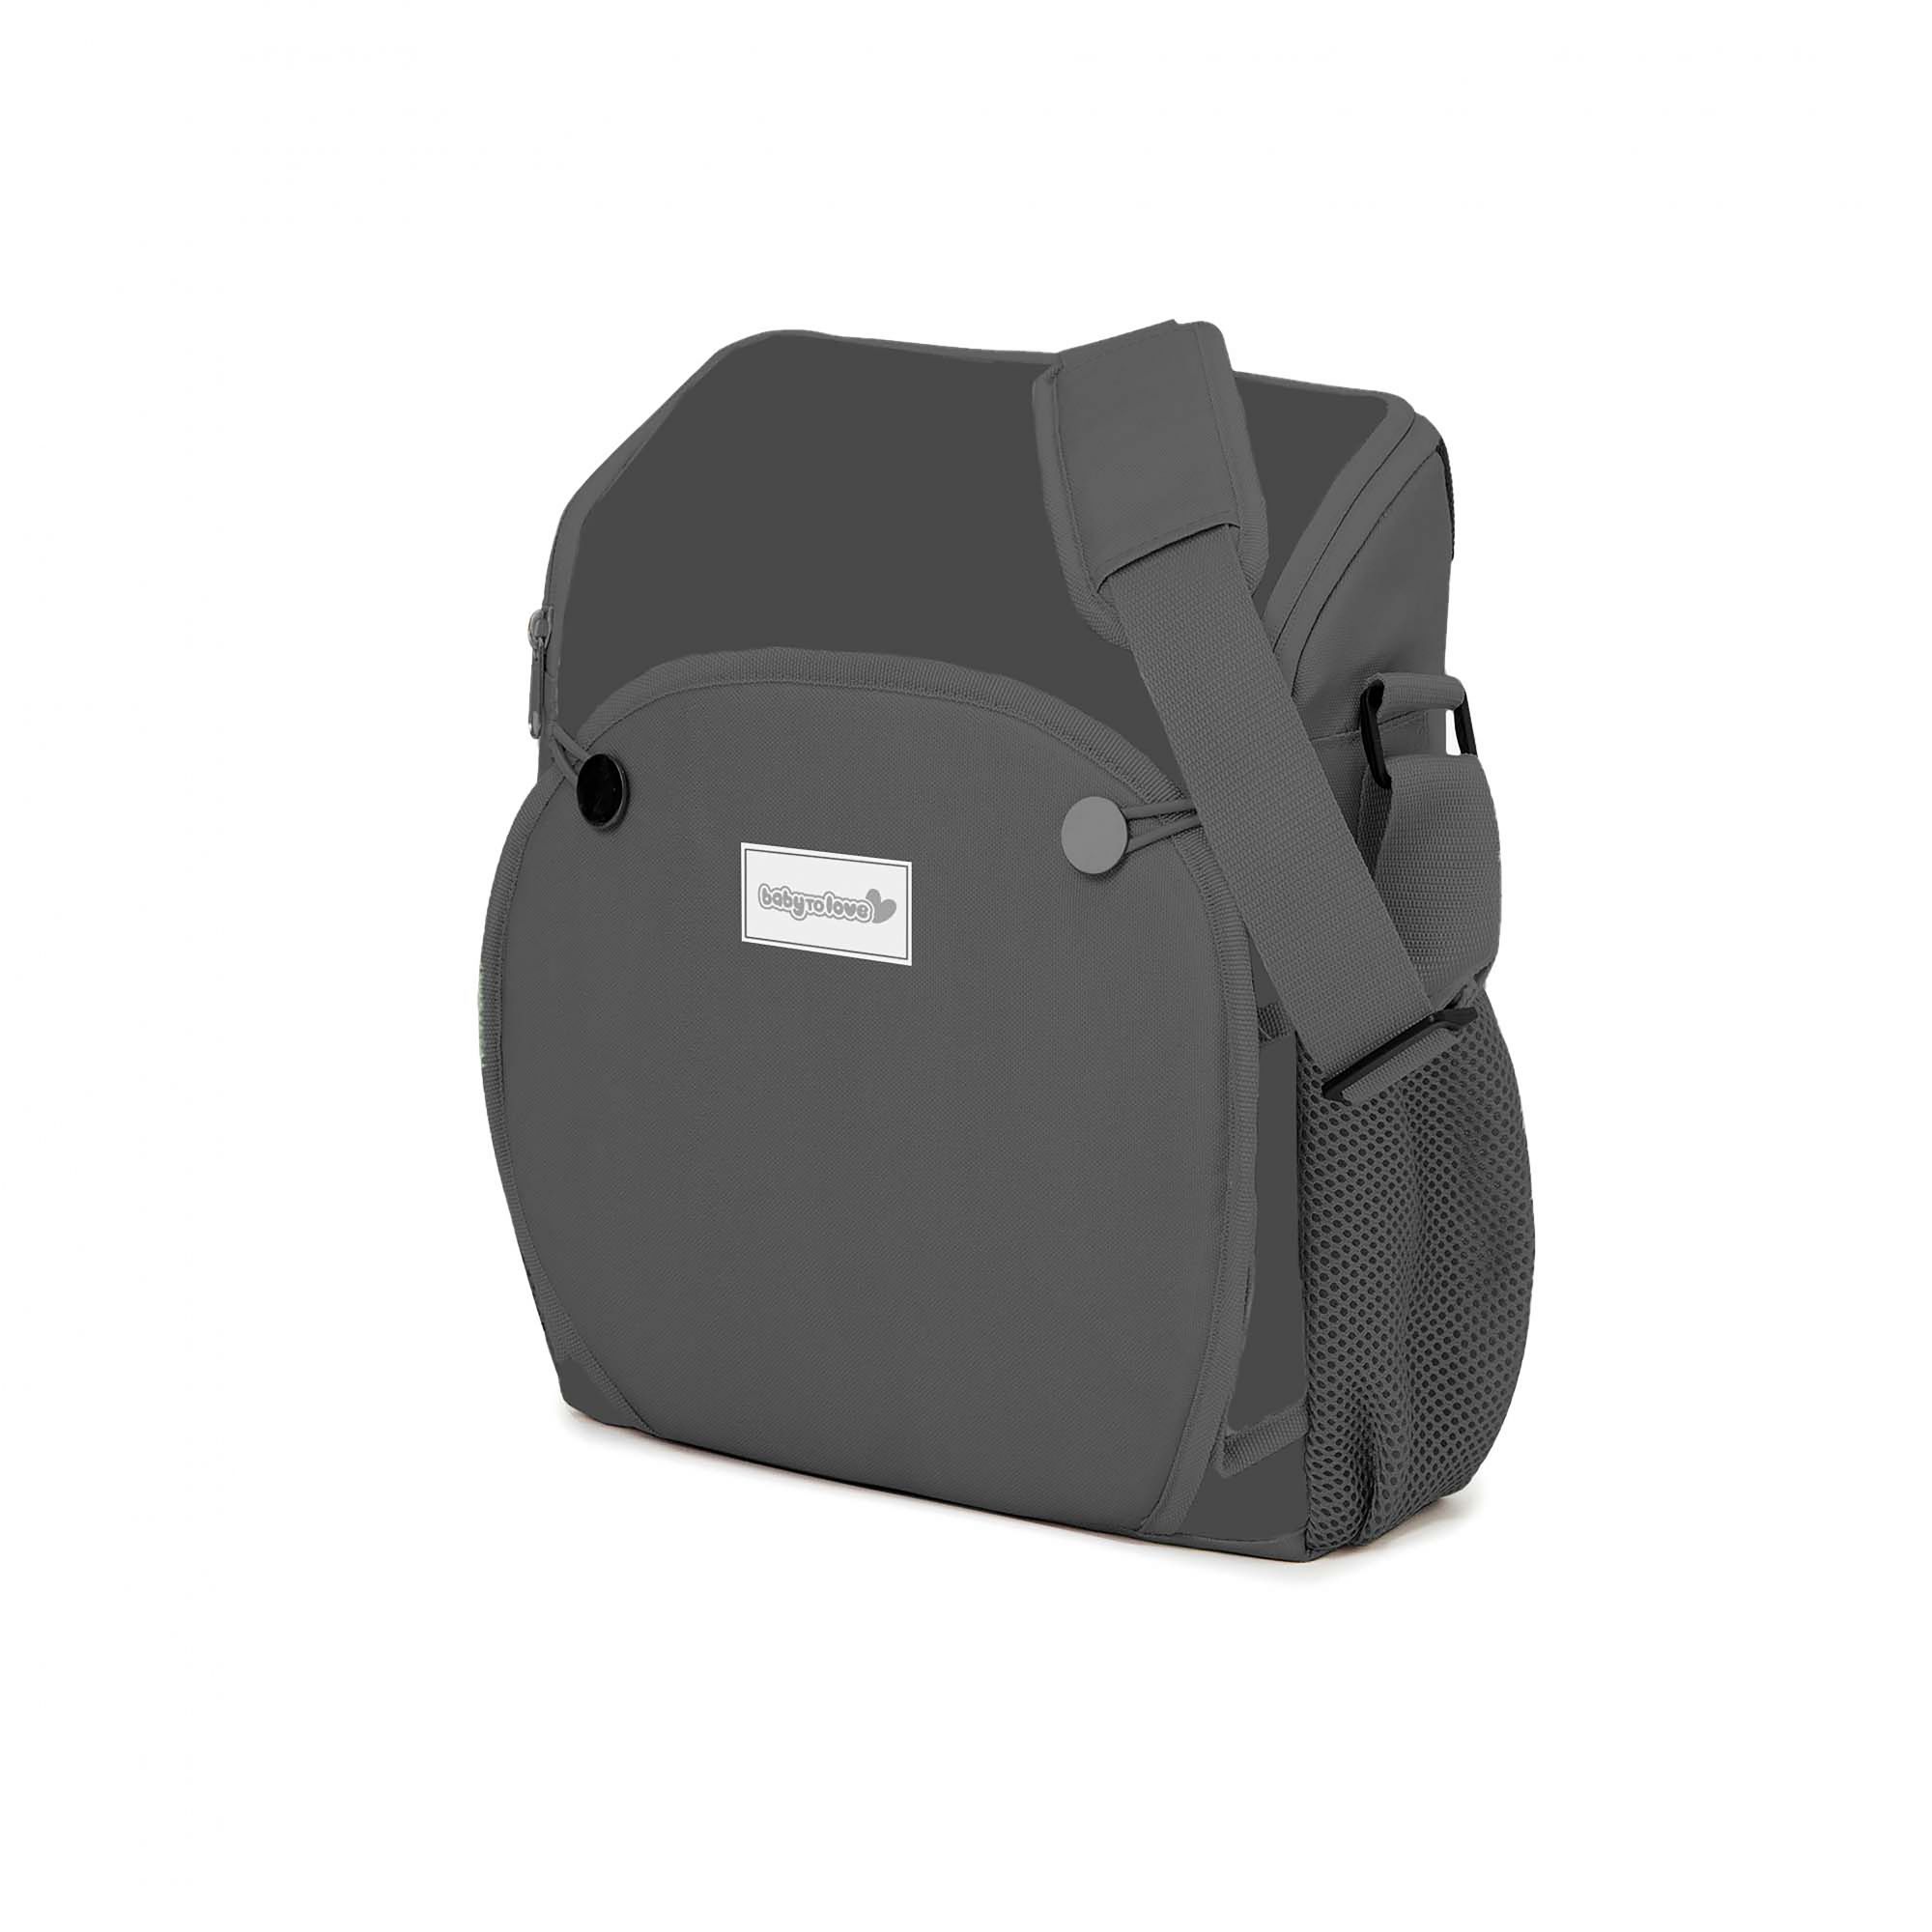 Rehausseur nomade Travel Up Anthracite - Made in Bébé